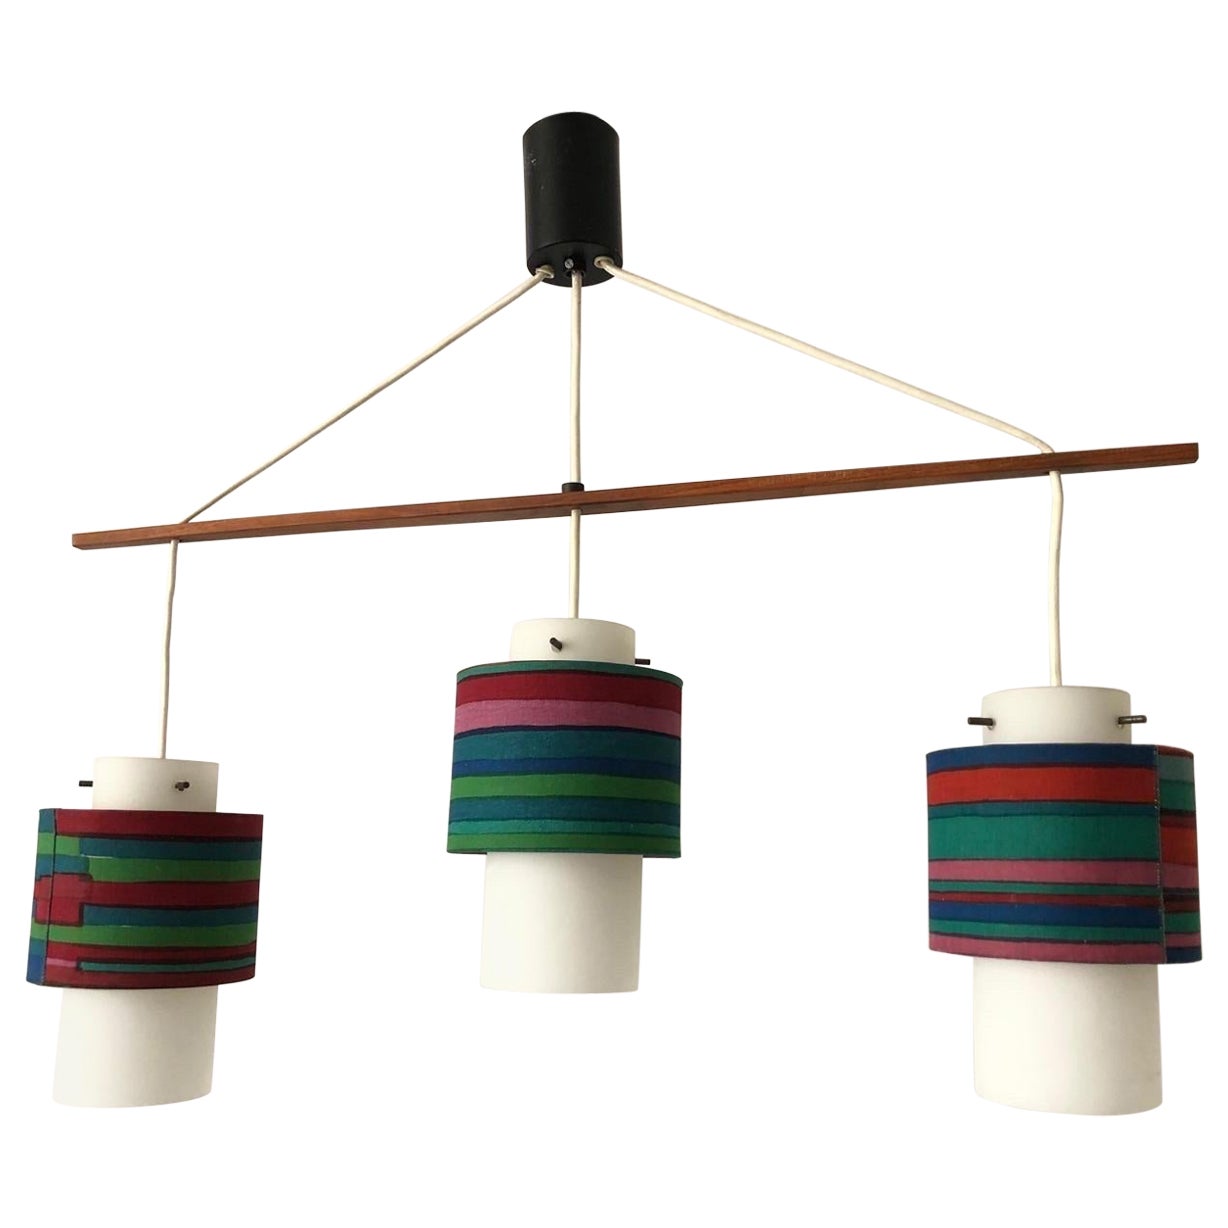 Retro Fabric Shade & Glass Triple Pendant Lamp, 1960s, Germany For Sale